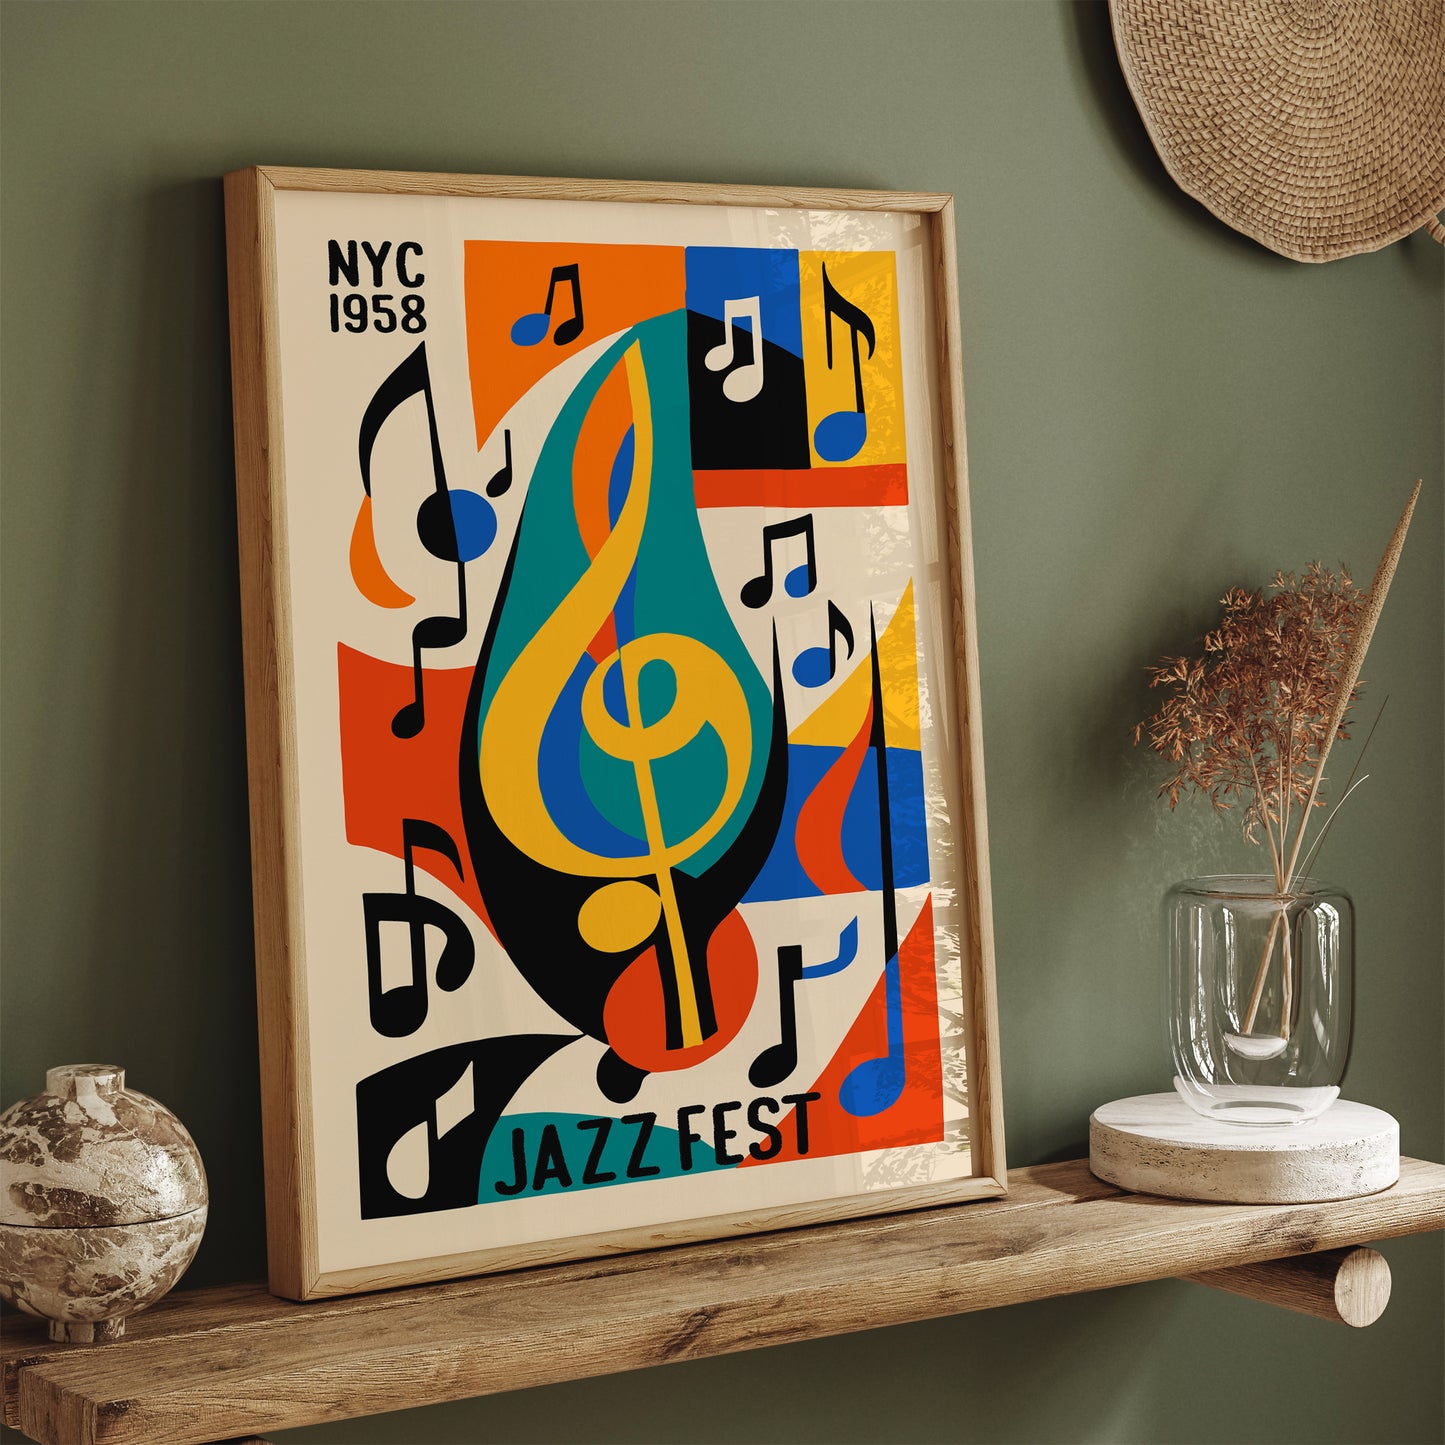 NYC Jazz Fest Retro Colorful Poster